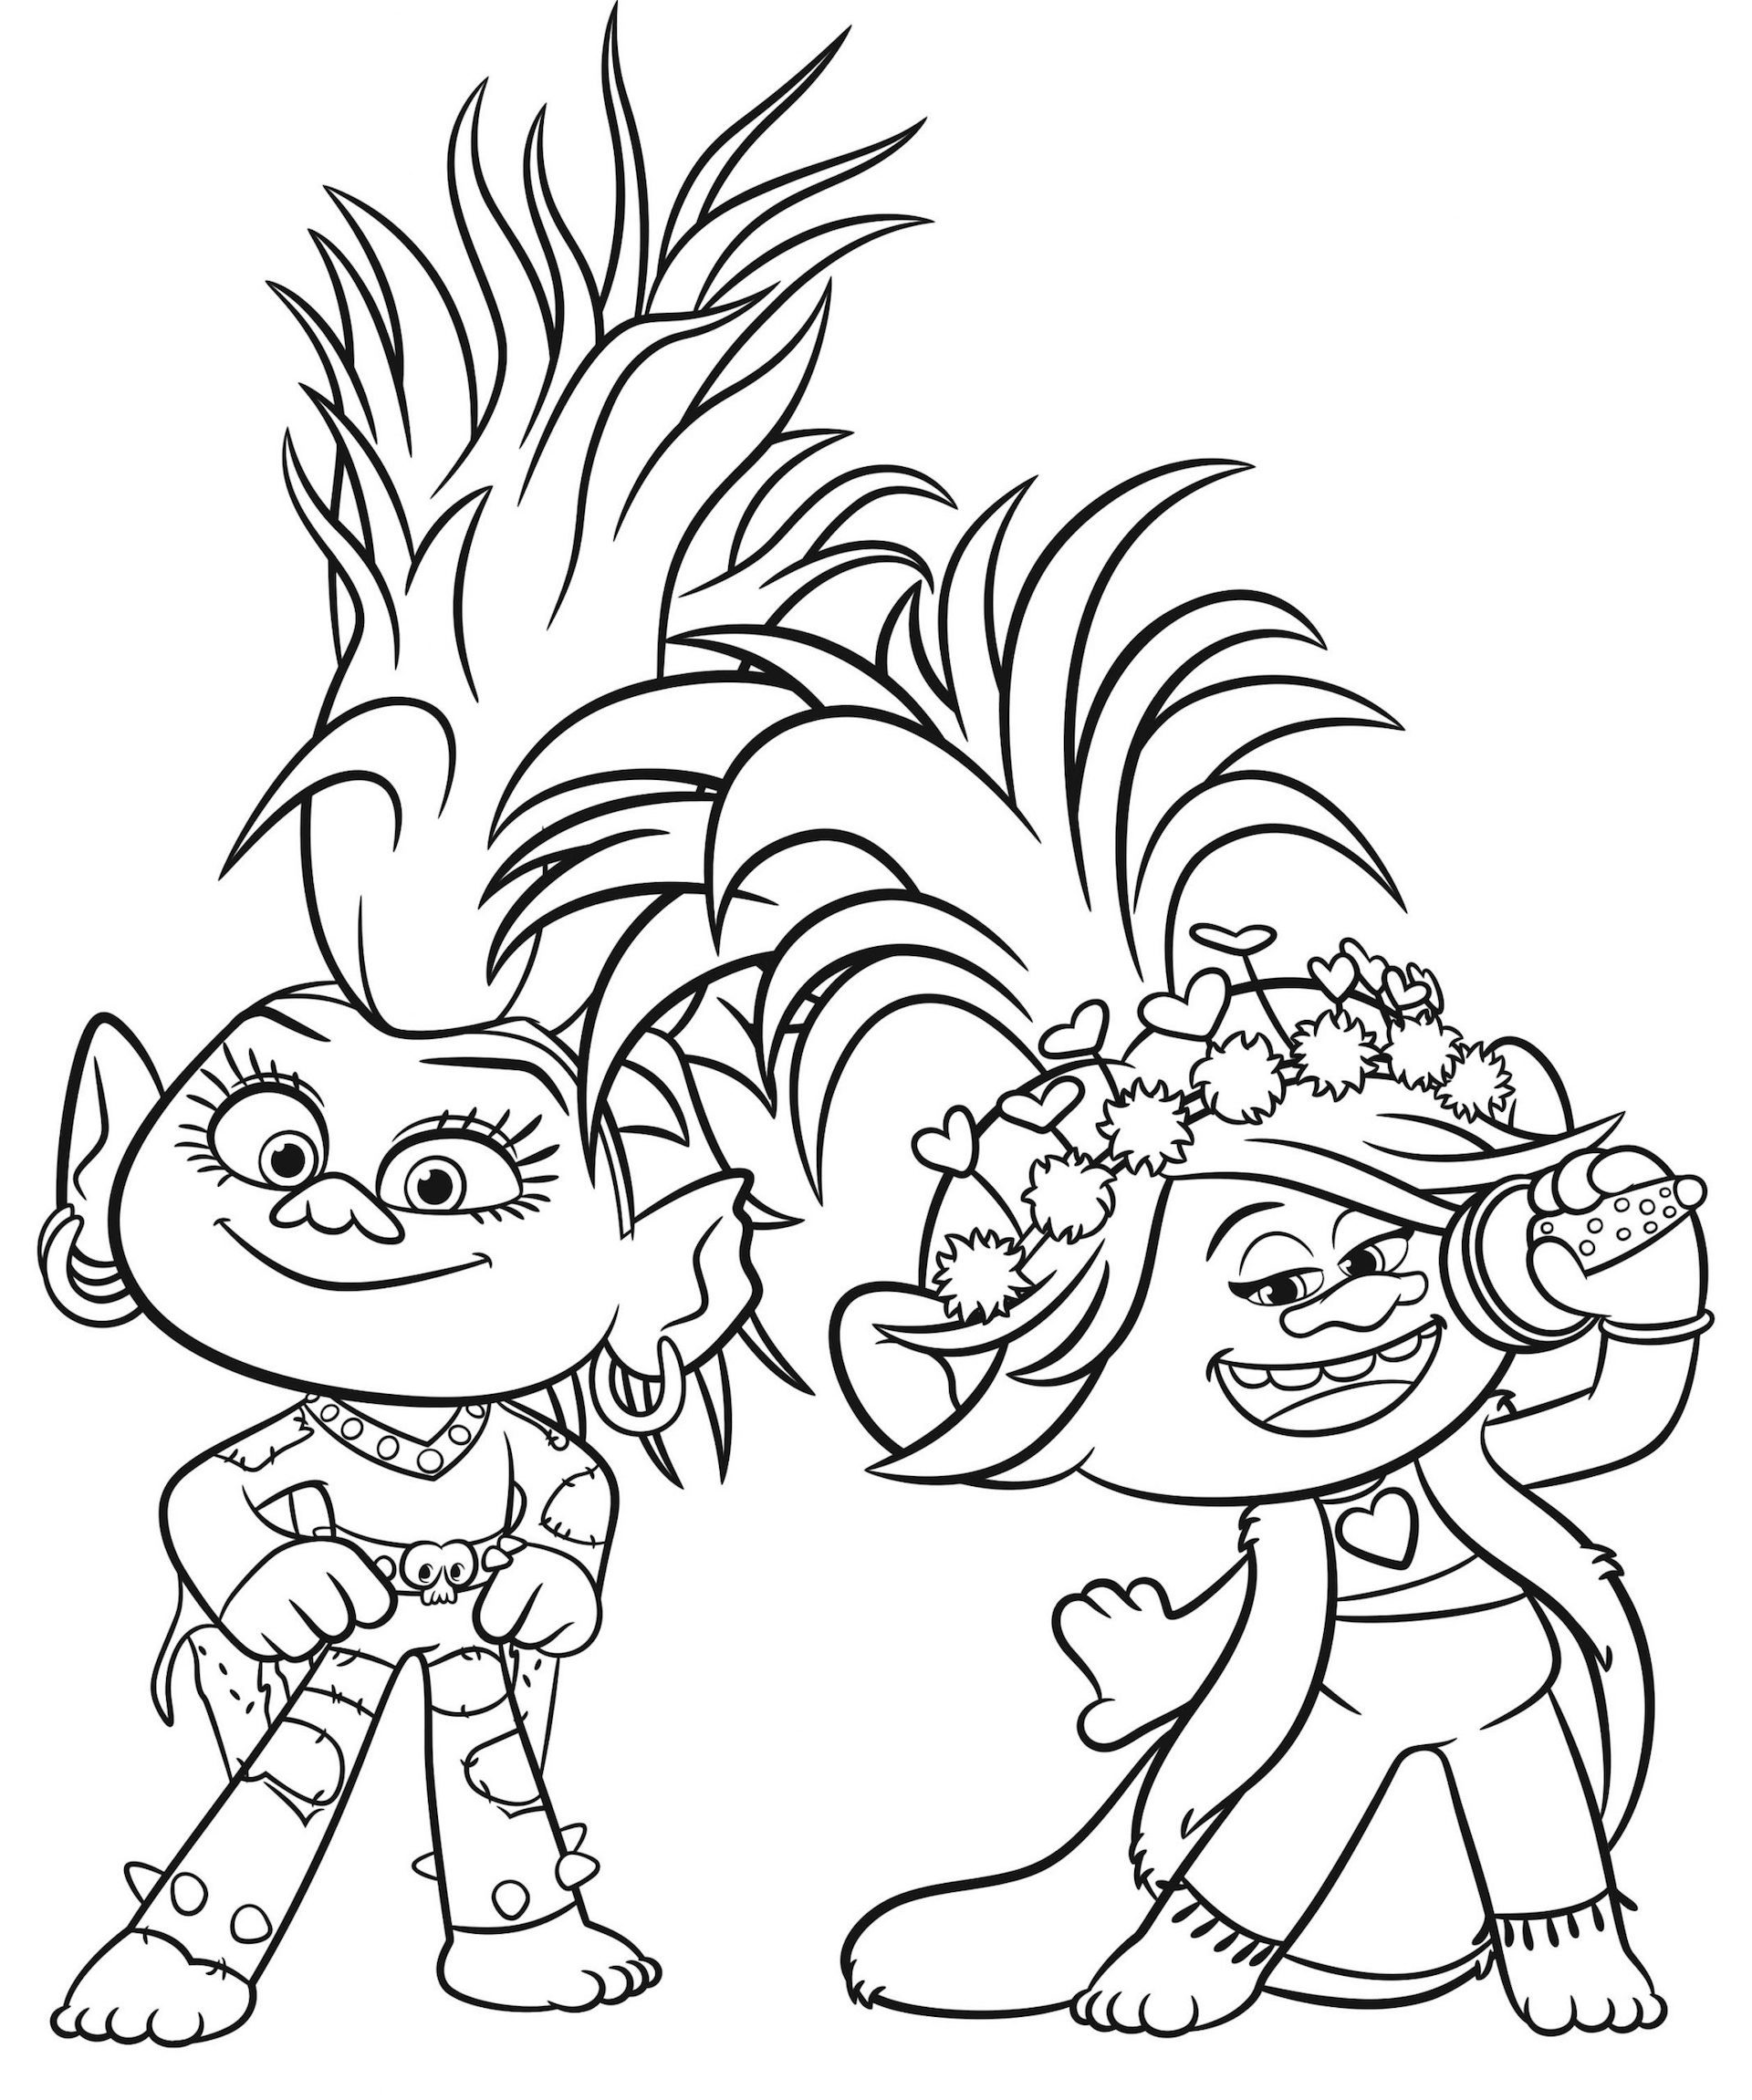 Trolls 2 Coloring Pages